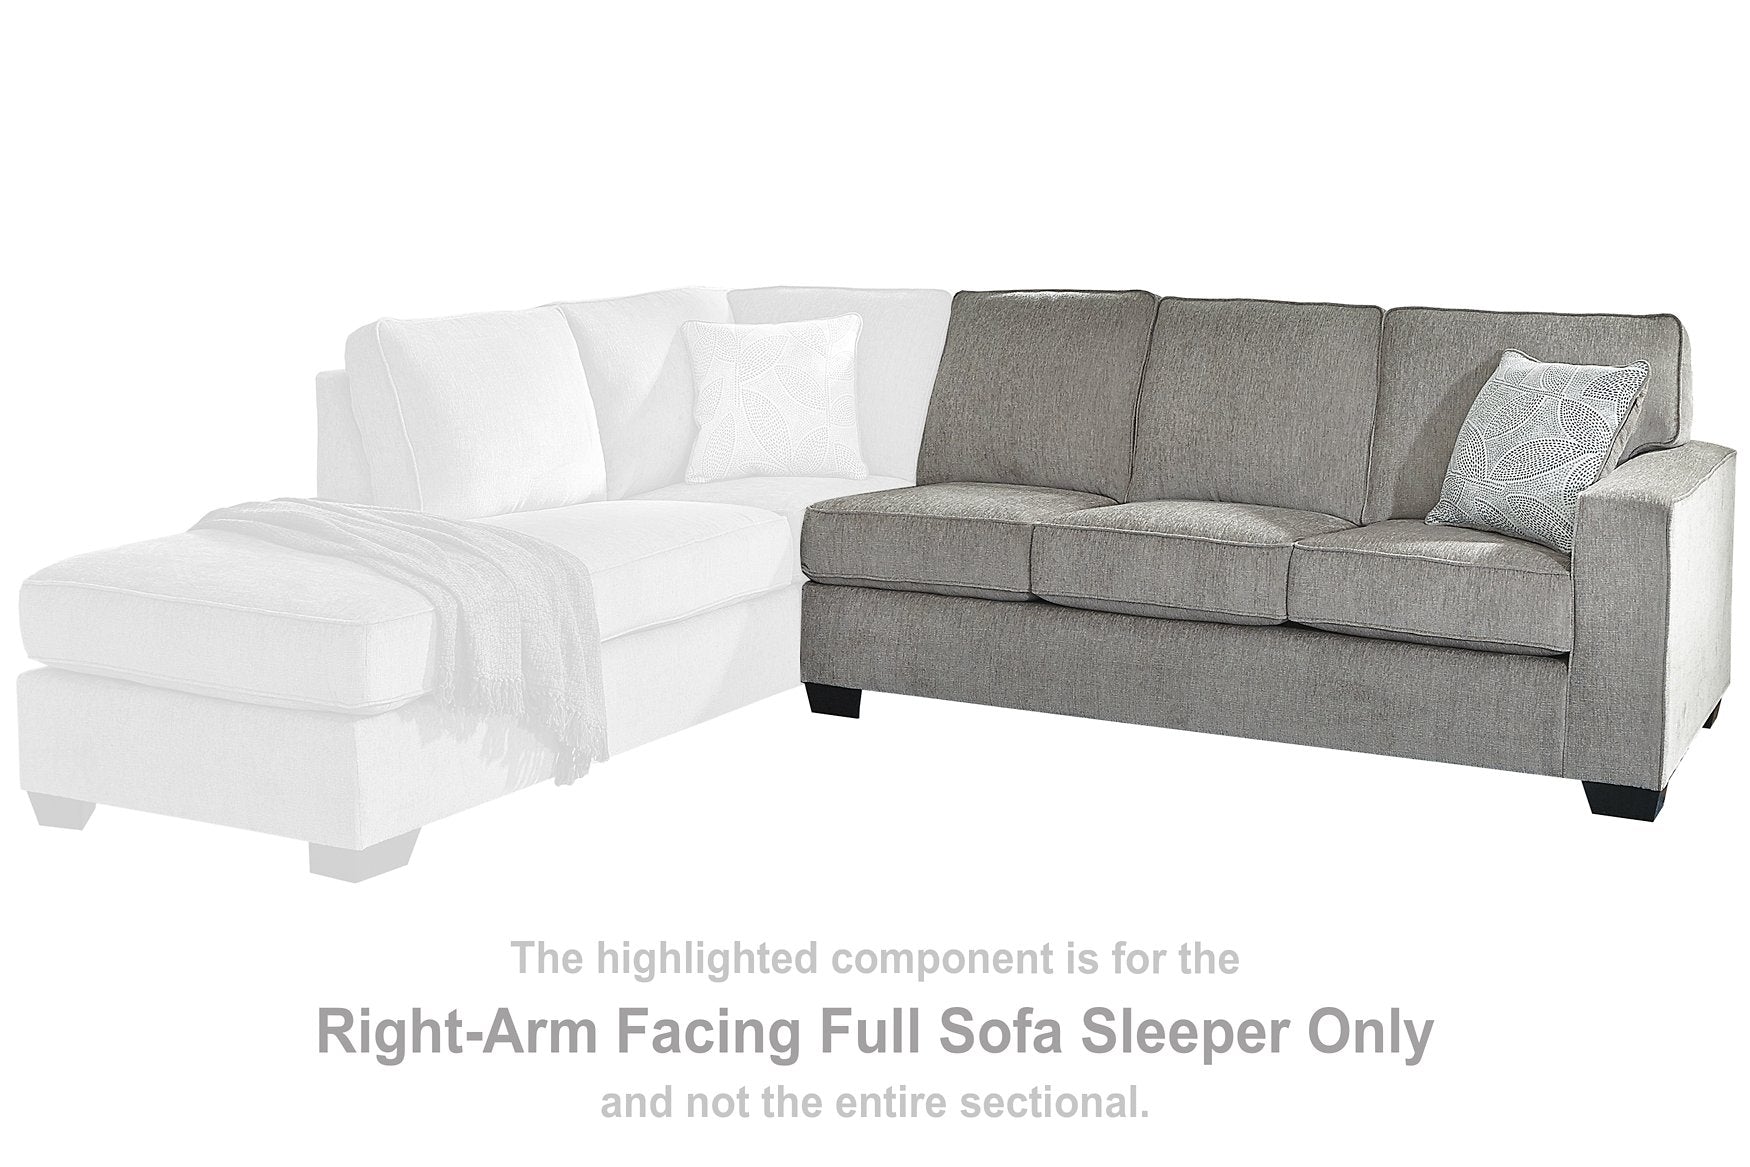 Altari 2-Piece Sleeper Sectional with Chaise - Half Price Furniture